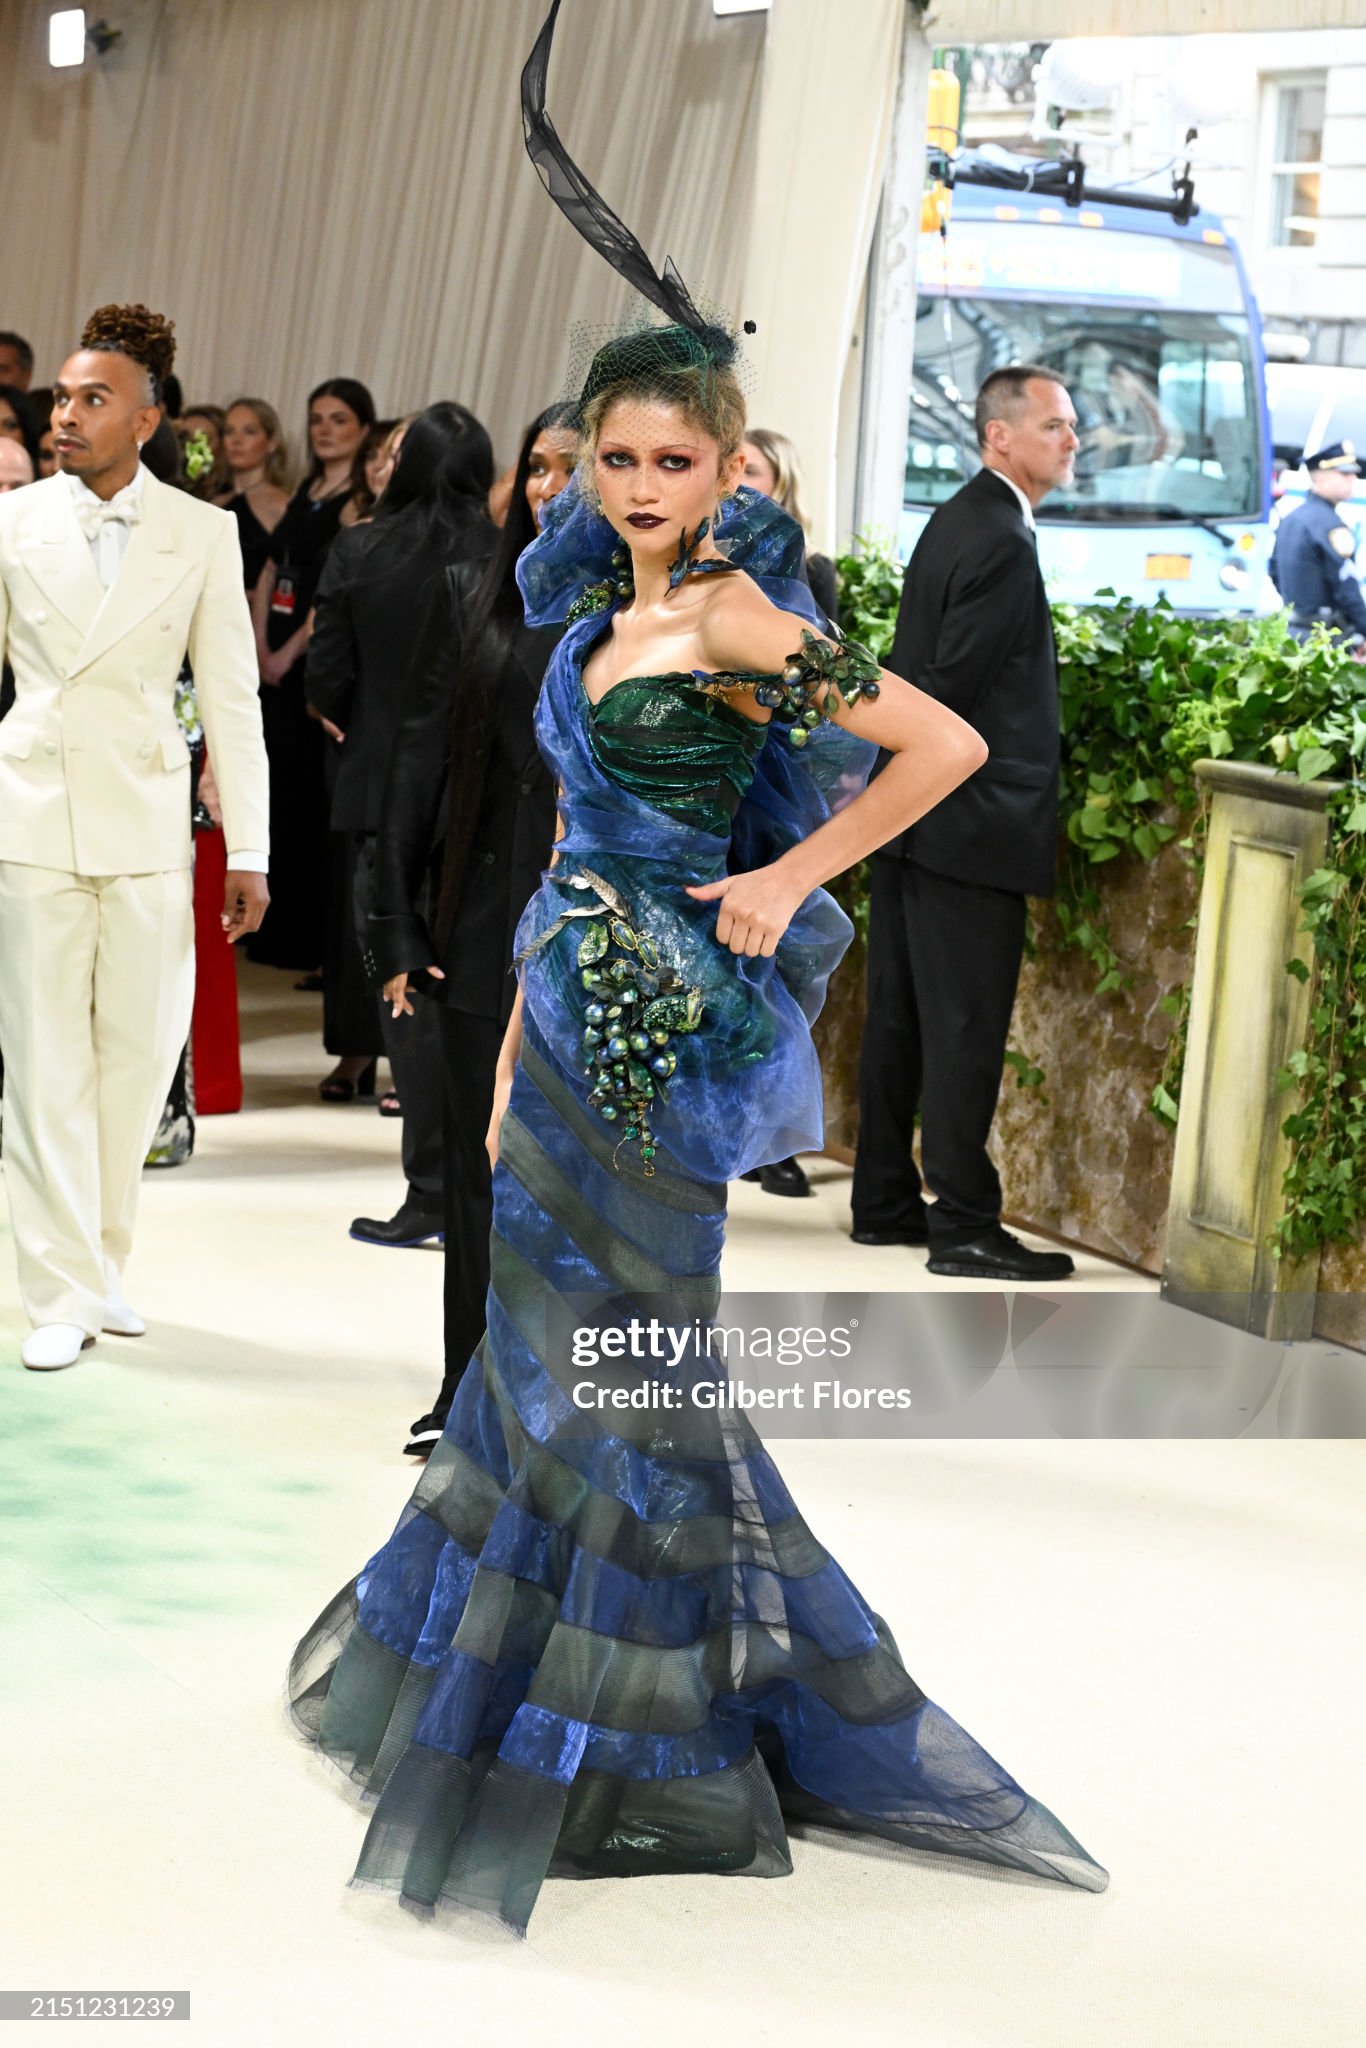 gettyimages-2151231239-2048x2048.jpg